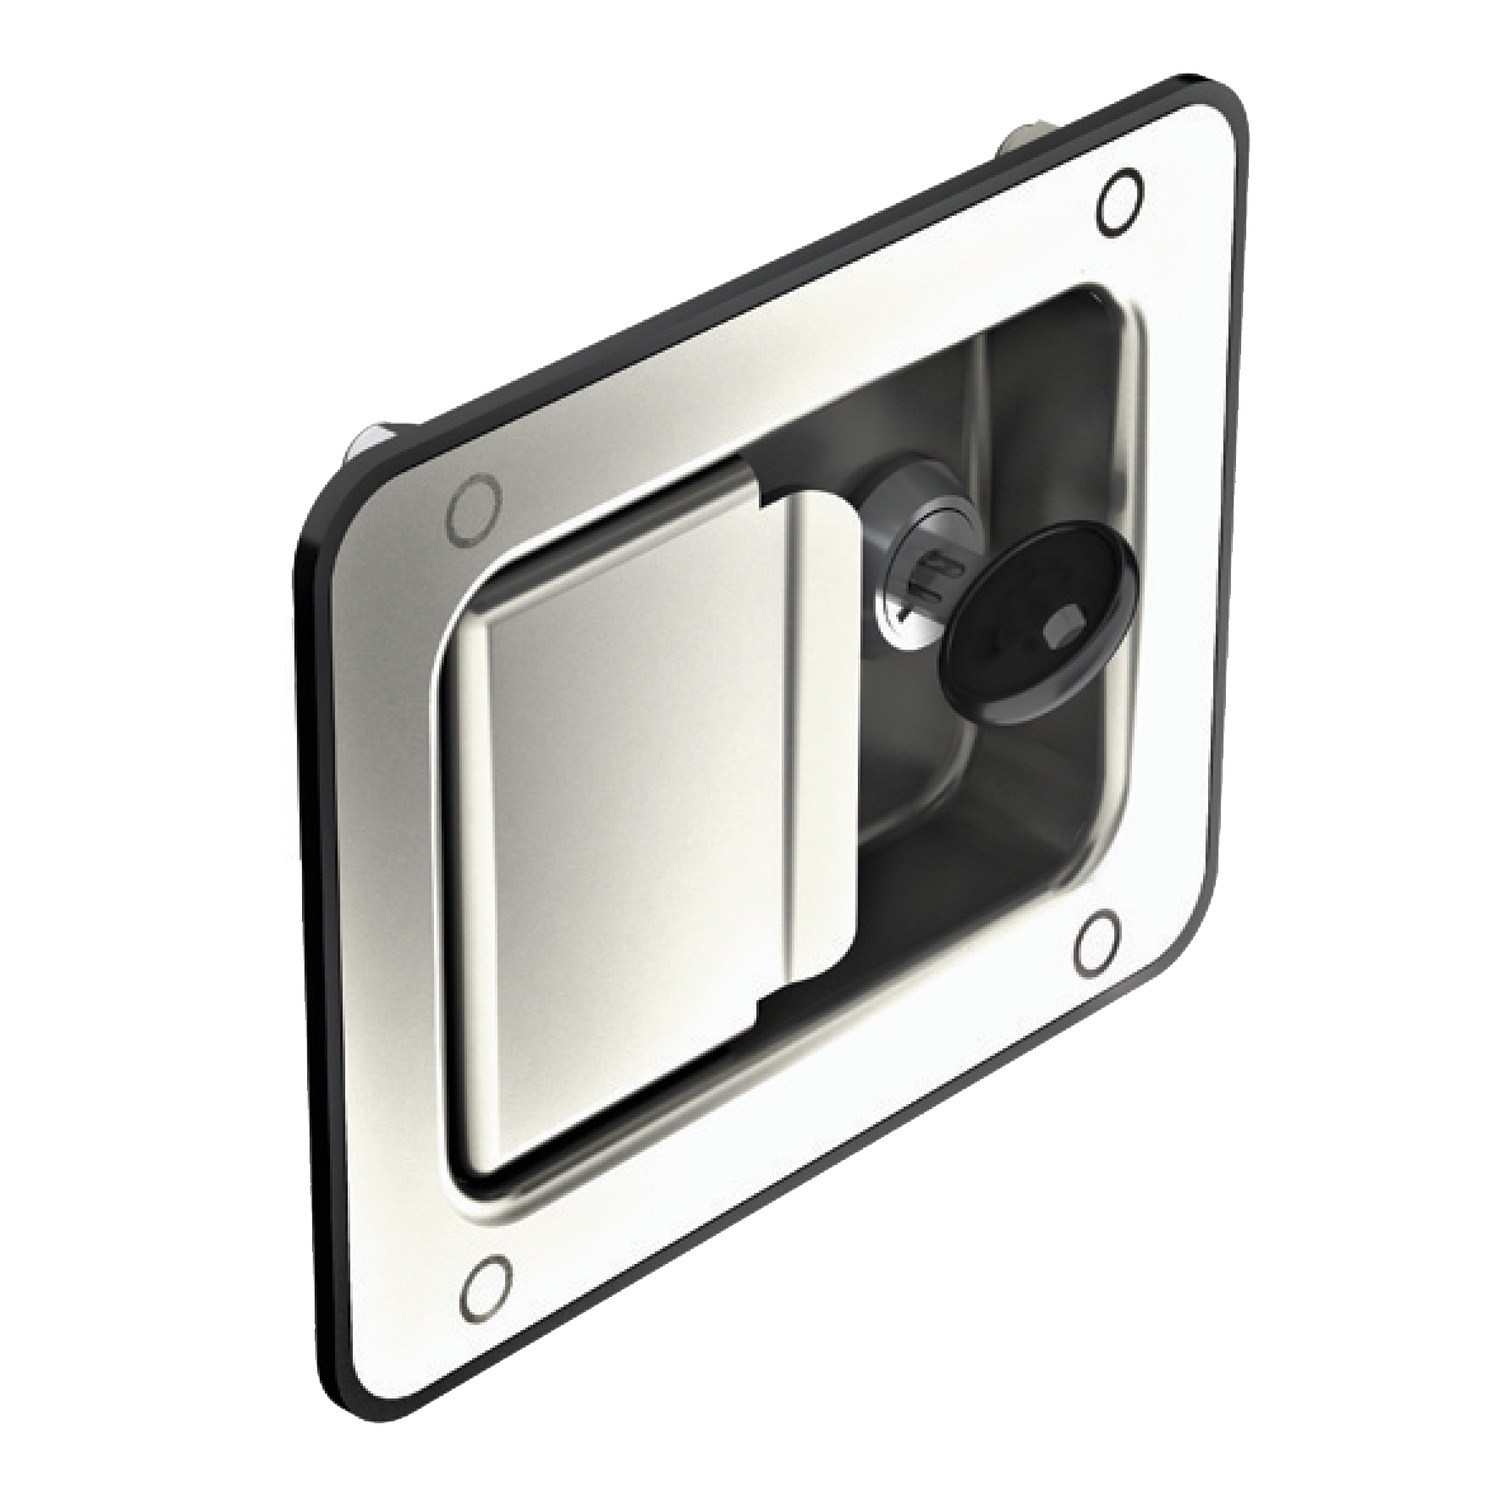 Push To Close Paddle Latches Made in Stainless Steel, pull to open paddle latch, fully integrated with lock, latch and flush fitting paddle handle.